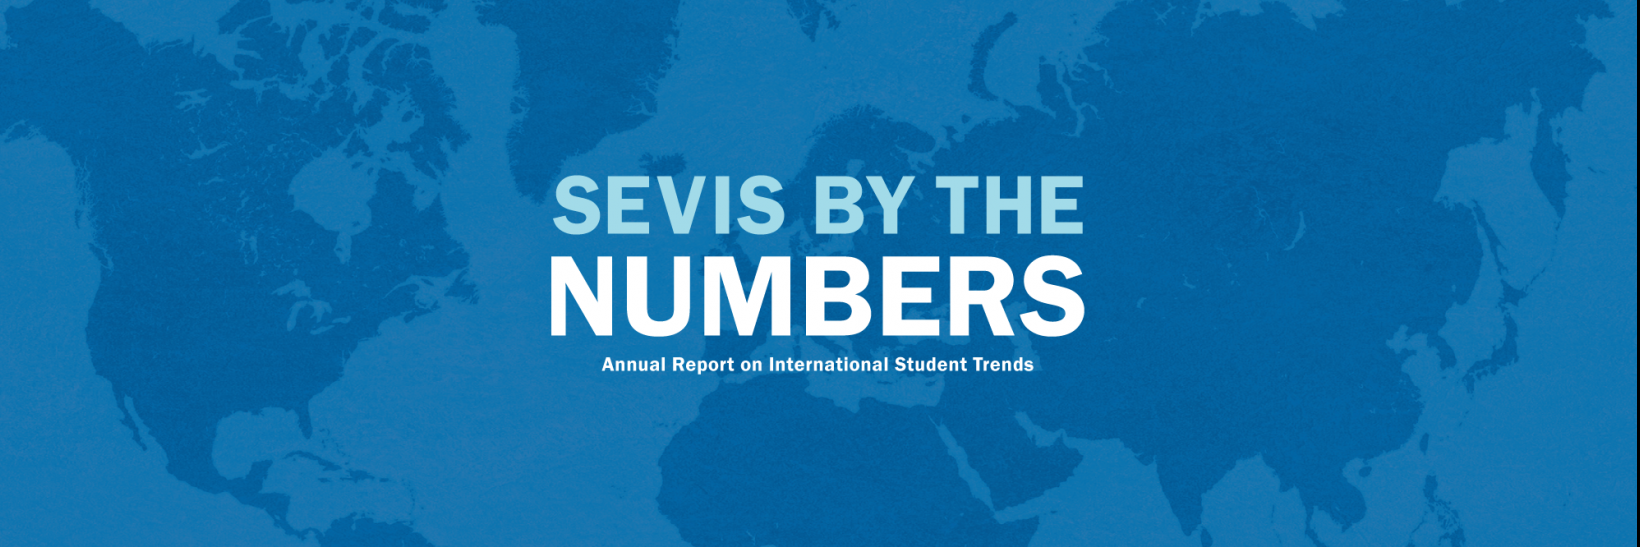 SEVIS by the Number